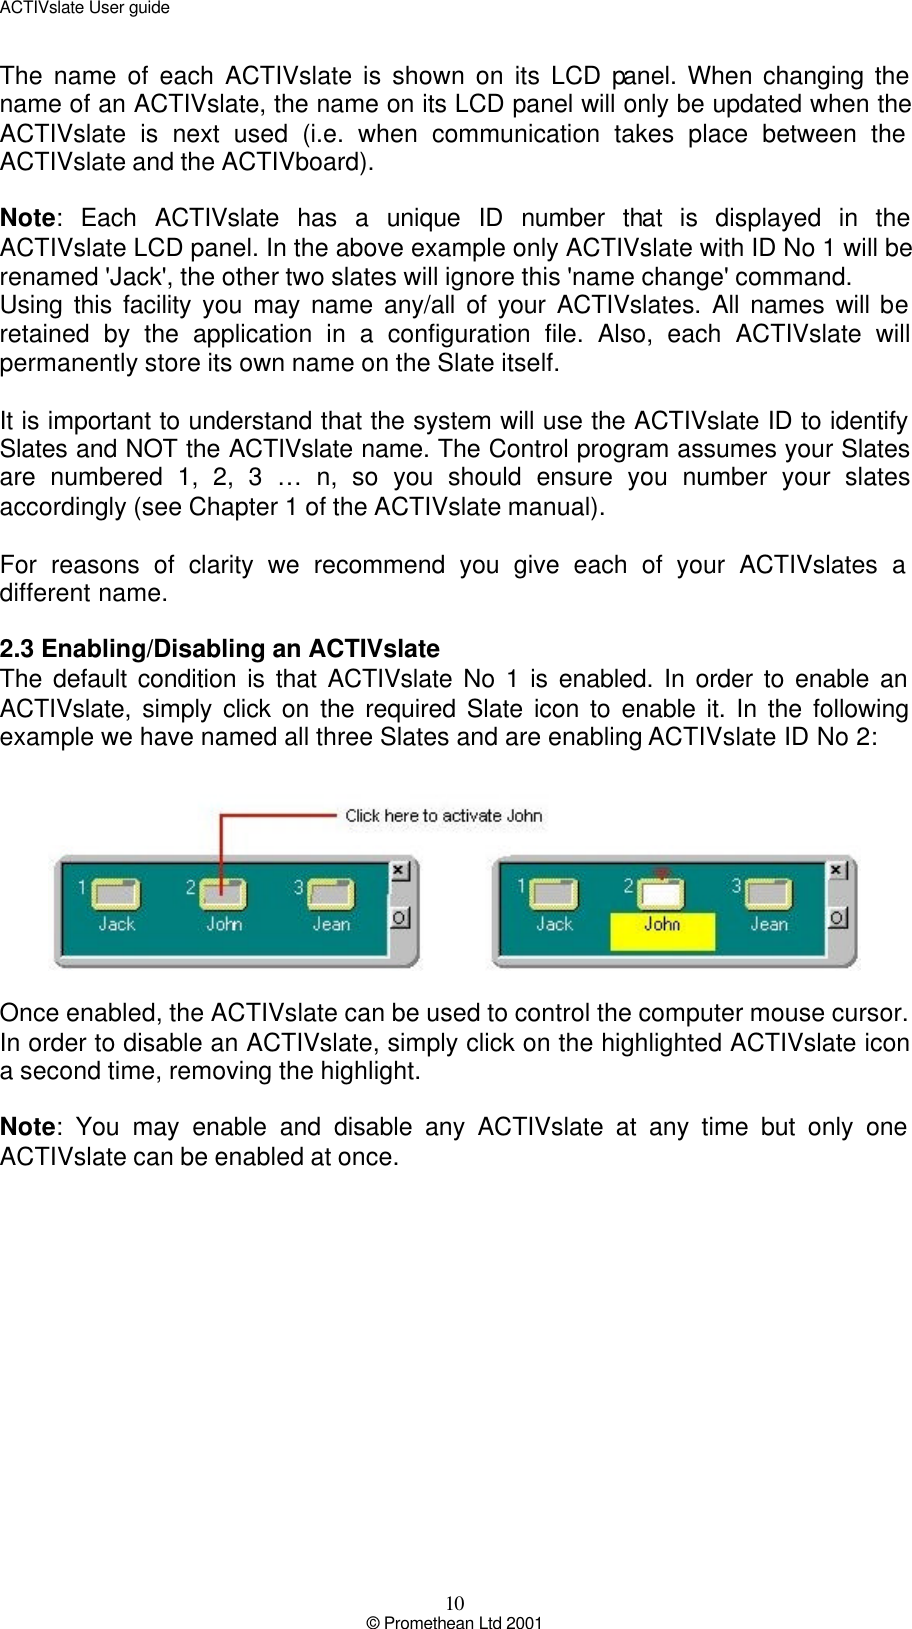 ACTIVslate User guide 10 © Promethean Ltd 2001 The name of each ACTIVslate is shown on its LCD panel. When changing the name of an ACTIVslate, the name on its LCD panel will only be updated when the ACTIVslate is next used (i.e. when communication takes place between the ACTIVslate and the ACTIVboard).  Note: Each ACTIVslate has a unique ID number that is displayed in the ACTIVslate LCD panel. In the above example only ACTIVslate with ID No 1 will be renamed &apos;Jack&apos;, the other two slates will ignore this &apos;name change&apos; command. Using this facility you may name any/all of your ACTIVslates. All names will be retained by the application in a configuration file. Also, each ACTIVslate will permanently store its own name on the Slate itself.  It is important to understand that the system will use the ACTIVslate ID to identify Slates and NOT the ACTIVslate name. The Control program assumes your Slates are numbered 1, 2, 3 … n, so you should ensure you number your slates accordingly (see Chapter 1 of the ACTIVslate manual).  For reasons of clarity we recommend you give each of your ACTIVslates a different name.  2.3 Enabling/Disabling an ACTIVslate The default condition is that ACTIVslate No 1 is enabled. In order to enable an ACTIVslate, simply click on the required Slate icon to enable it. In the following example we have named all three Slates and are enabling ACTIVslate ID No 2:    Once enabled, the ACTIVslate can be used to control the computer mouse cursor. In order to disable an ACTIVslate, simply click on the highlighted ACTIVslate icon a second time, removing the highlight.  Note: You may enable and disable any ACTIVslate at any time but only one ACTIVslate can be enabled at once.  